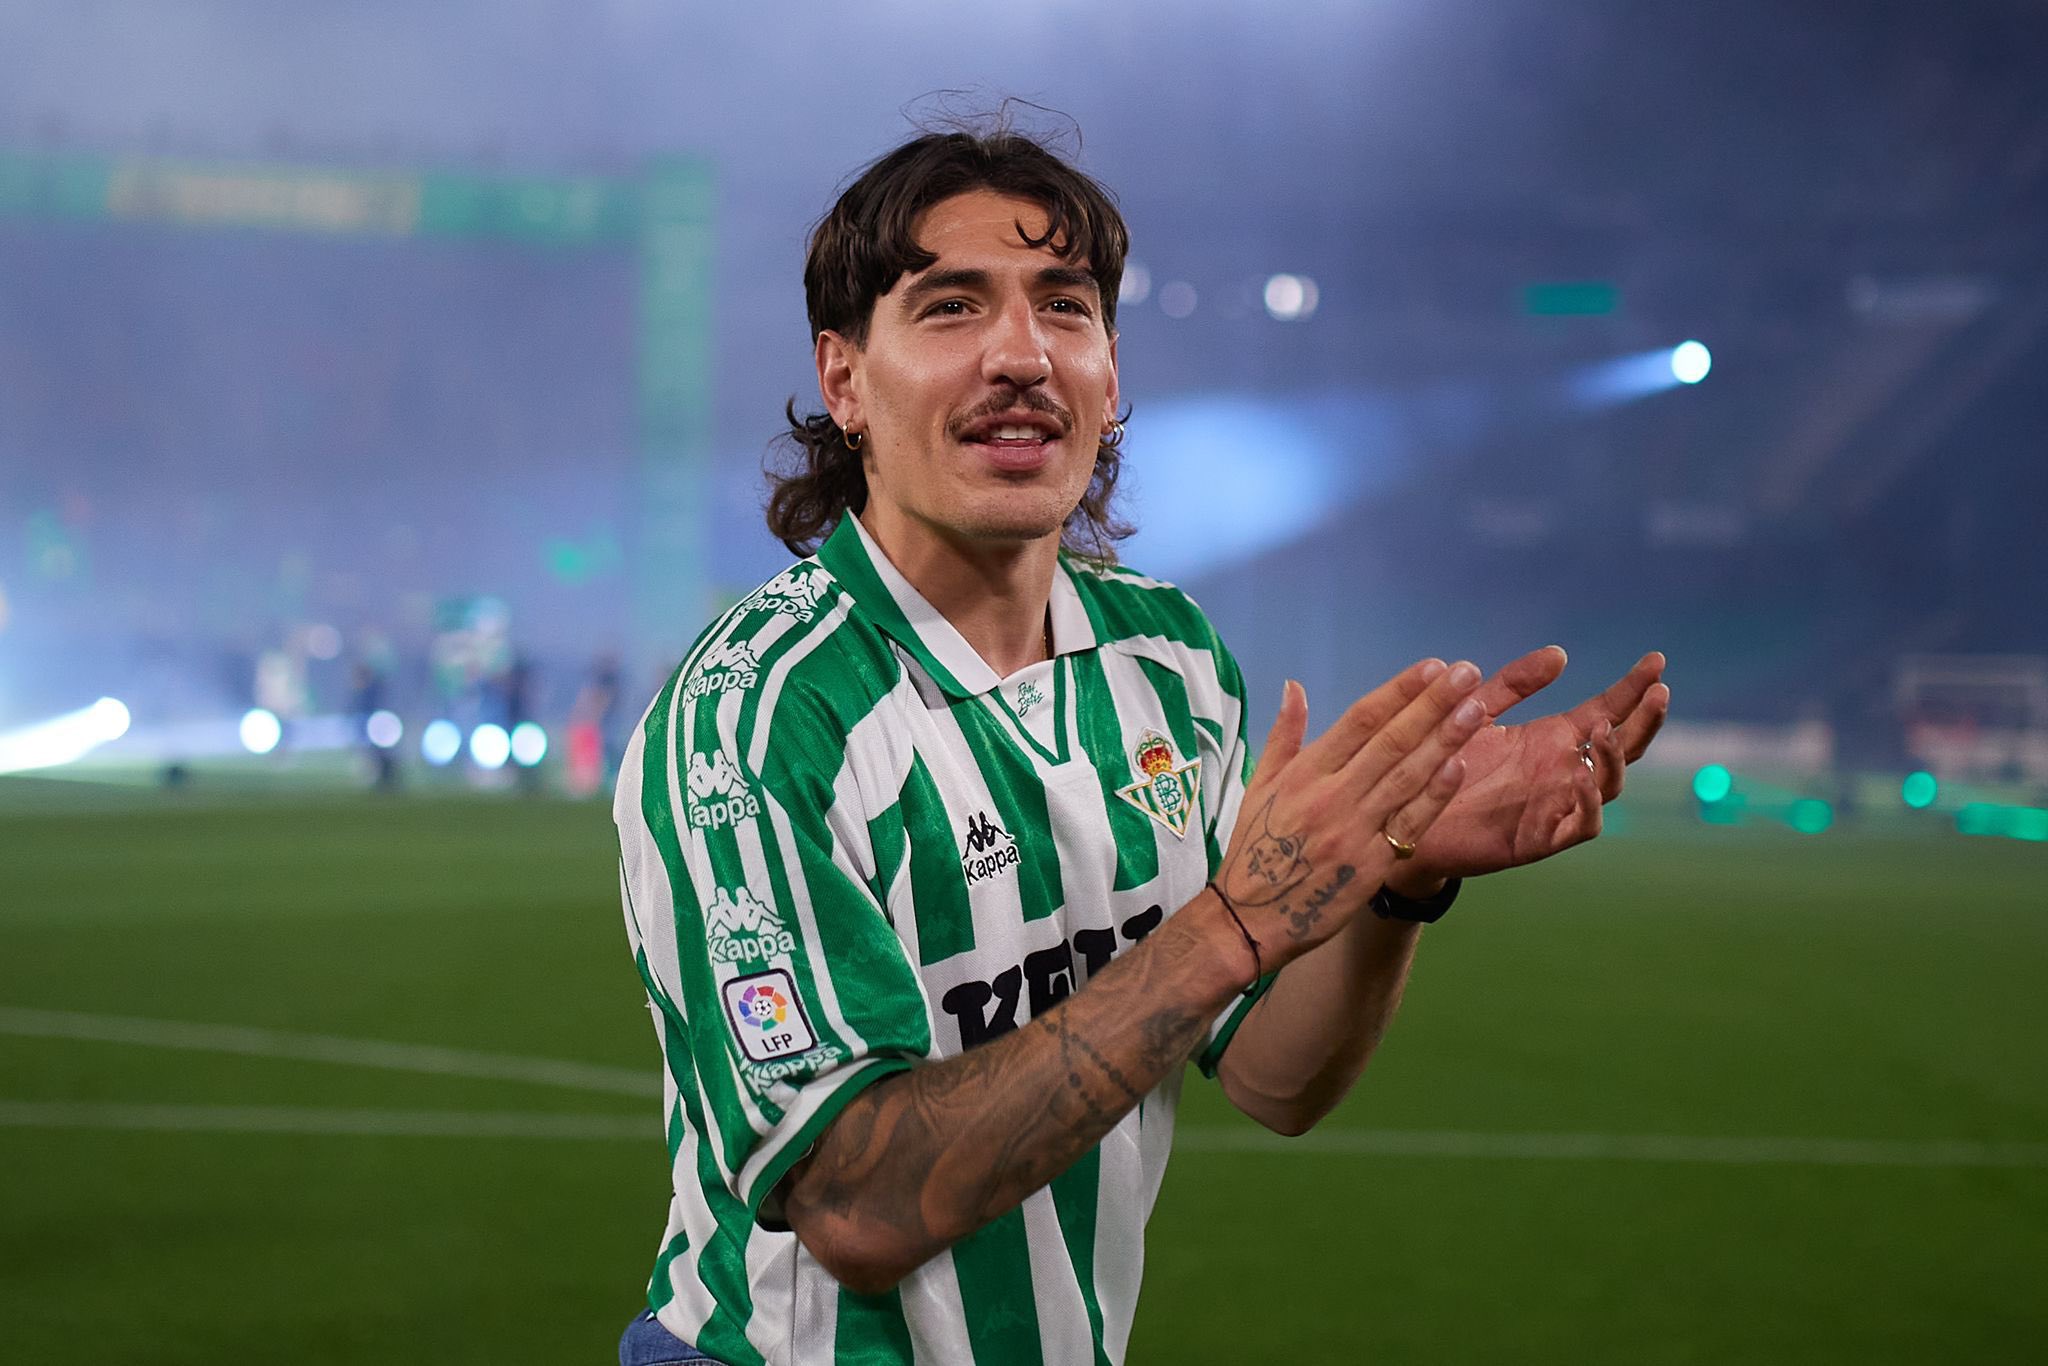 🚨🚨 UPDATE : Real Betis are interested in the signing of Hector